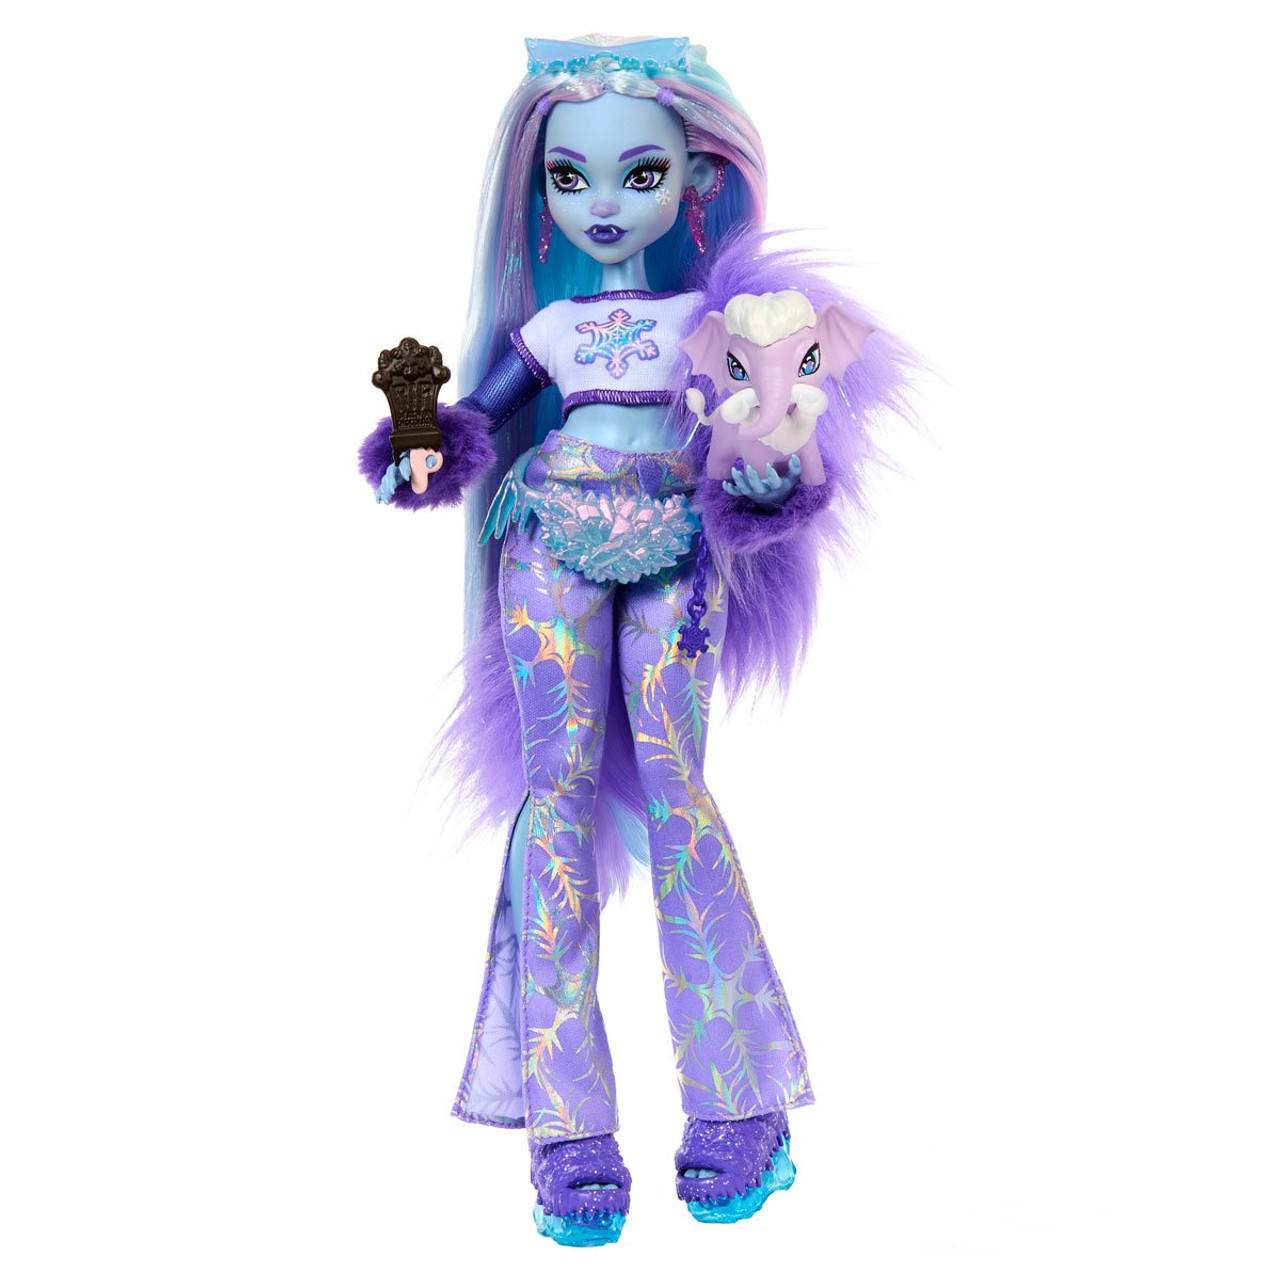 2022 Mattel Monster High Clawdeen Wolf G3 Doll New In Box Ready to Ship